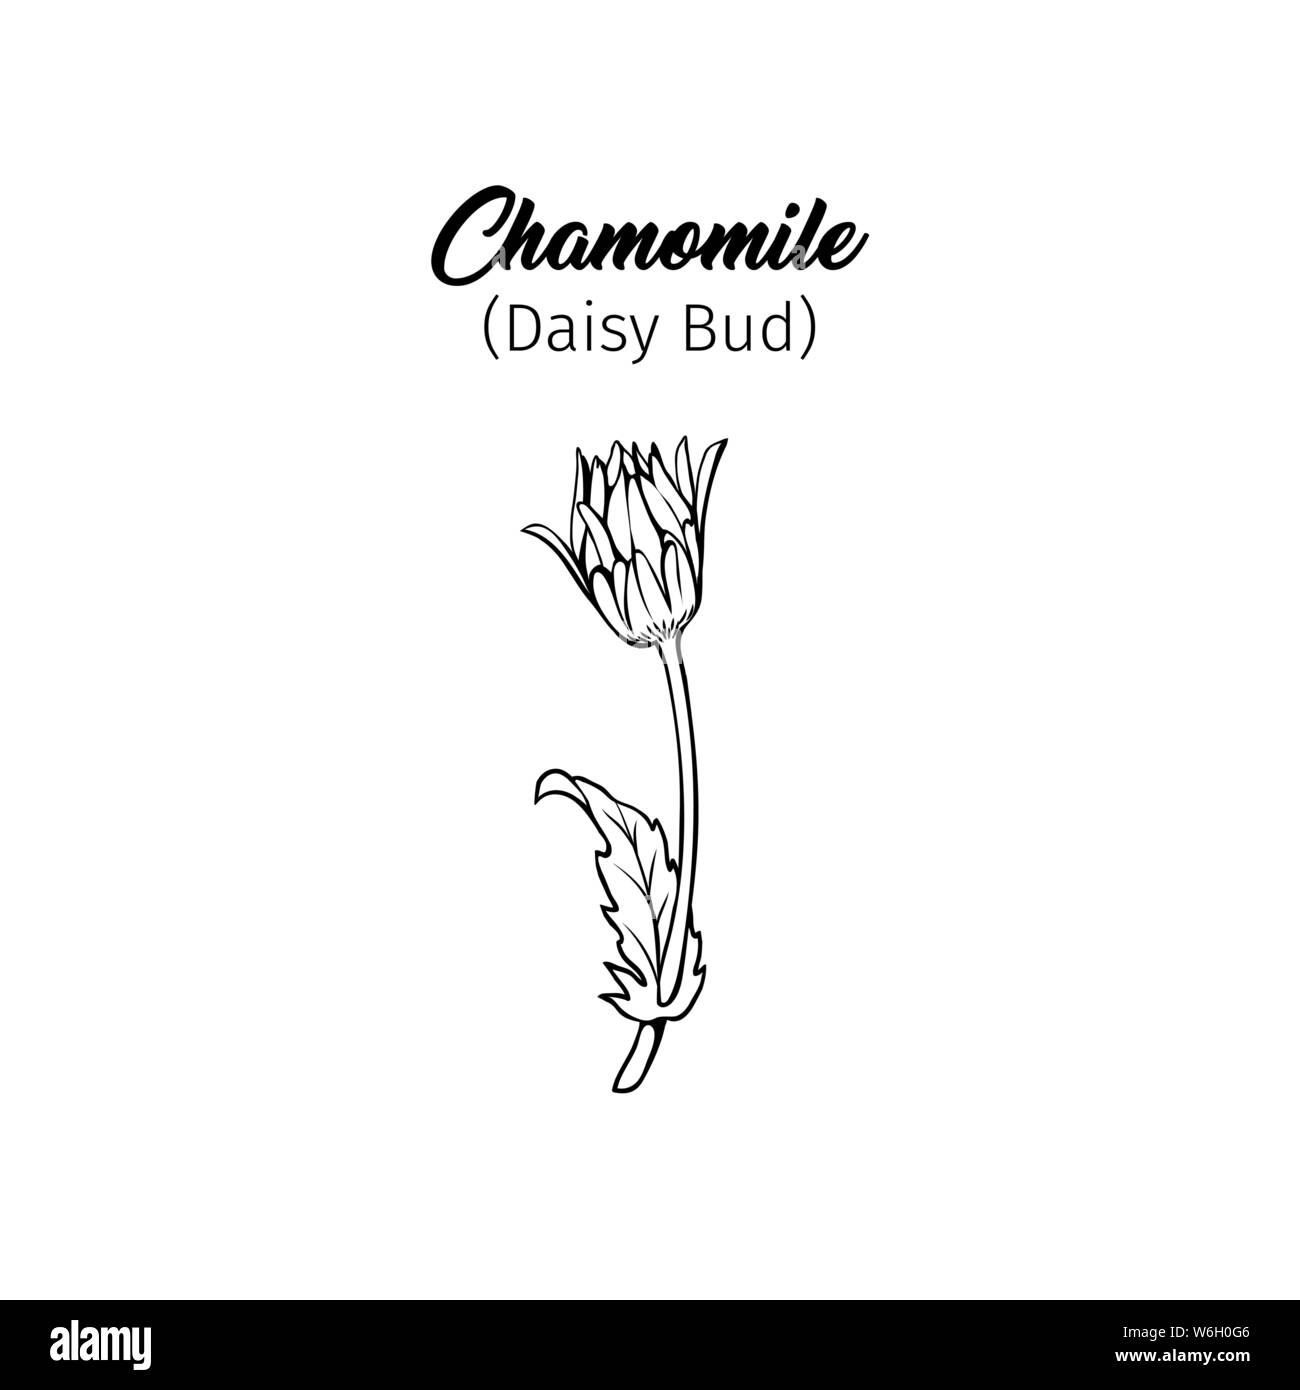 Daisy bud freehand vector illustration. Young German chamomile, Matricaria chamomilla outline with title. Honey plant, wild flower monochrome engravin Stock Vector